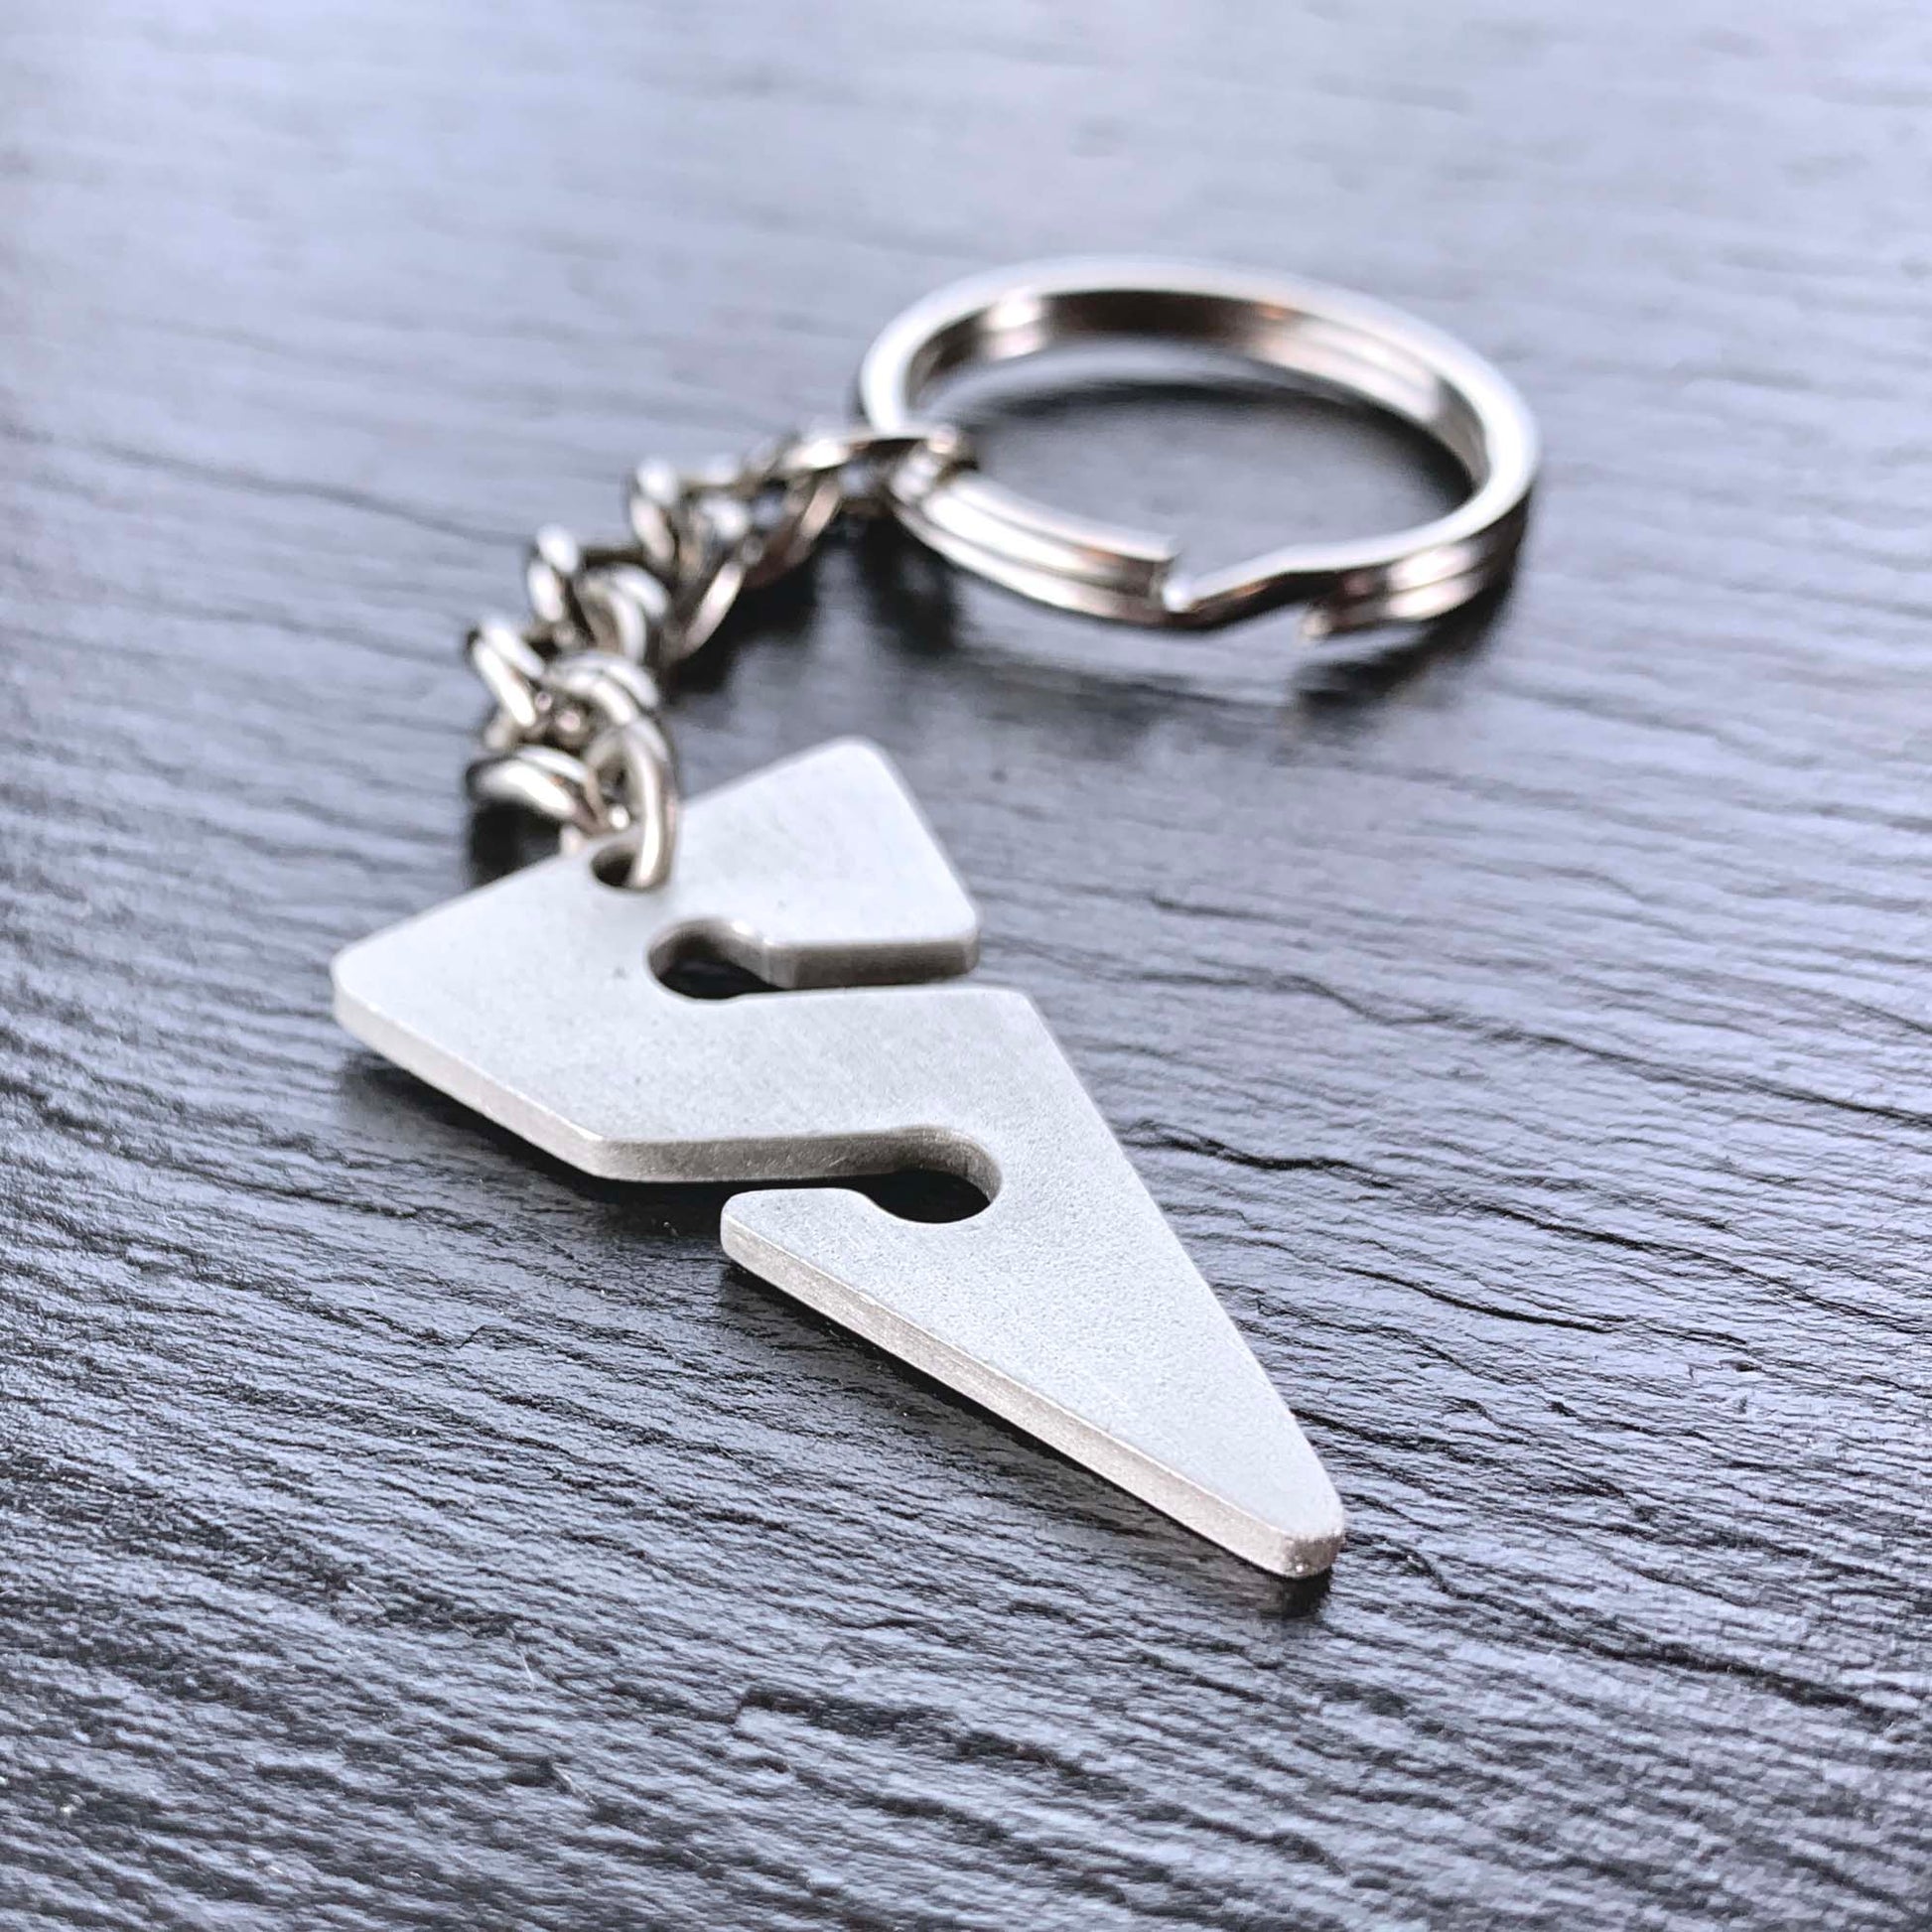 Line Arrow Keychain for Women and Men- Cave Diver Gifts for Women and Men, Line Arrow Pewter Key Chain, Gifts for Cave Divers - The Tool Store